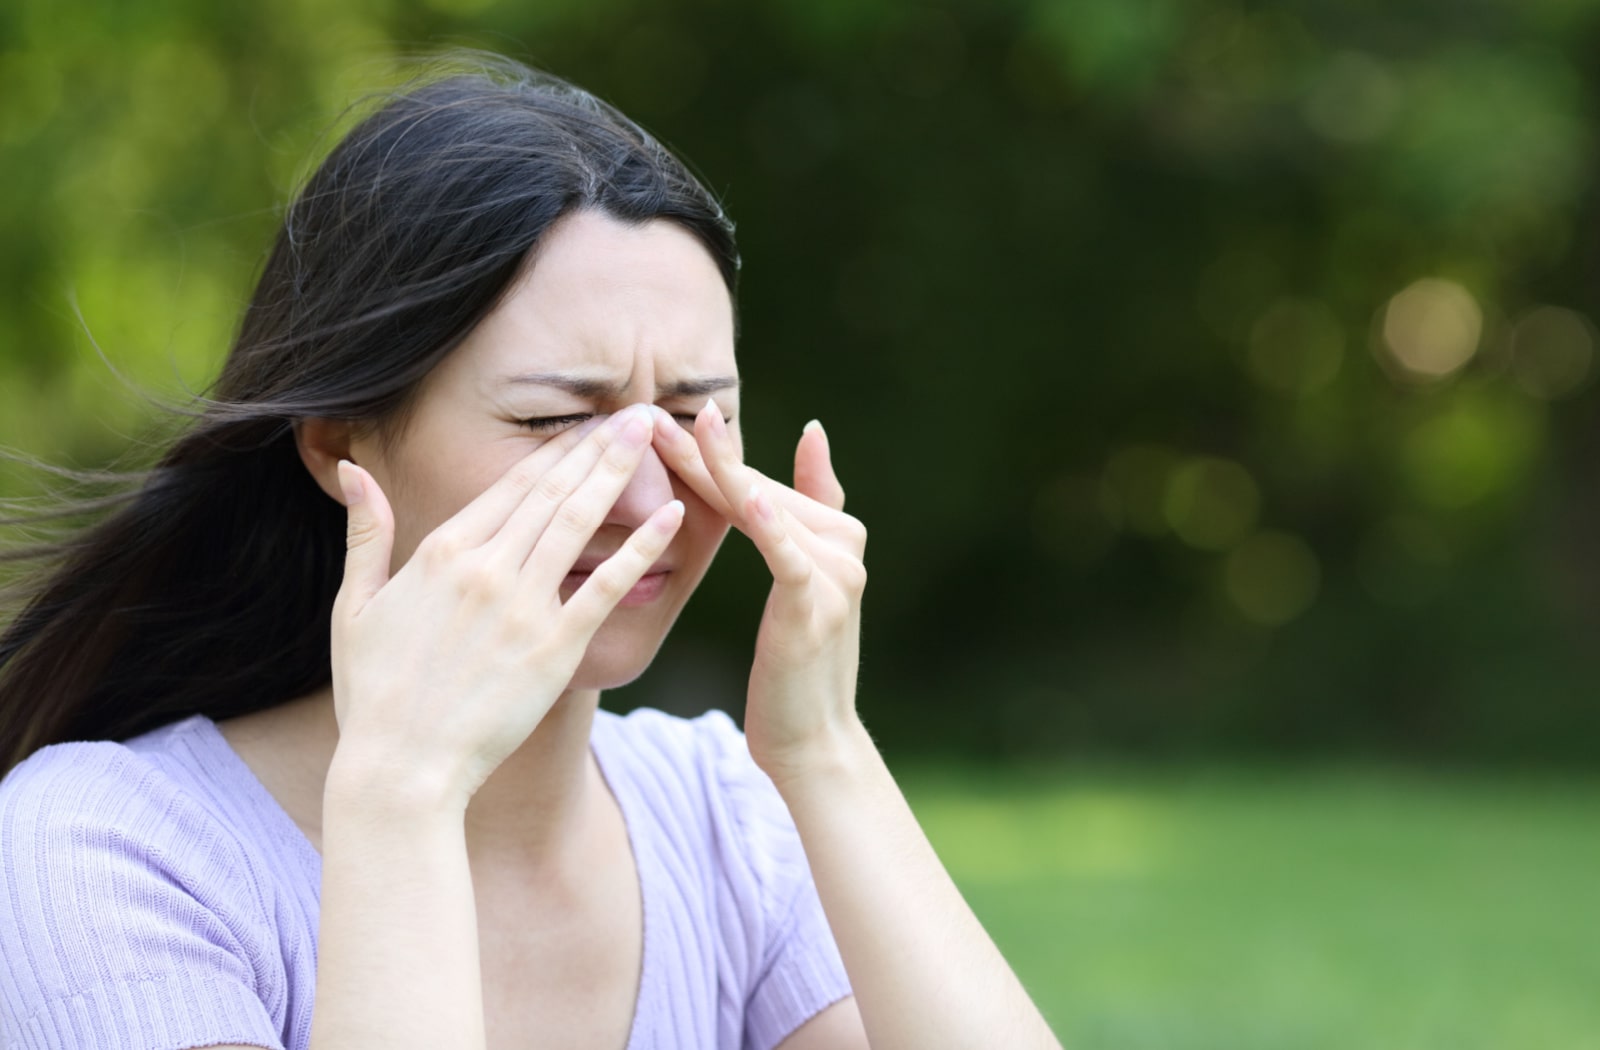 A woman standing outside and she is rubbing her eyes due to irritation